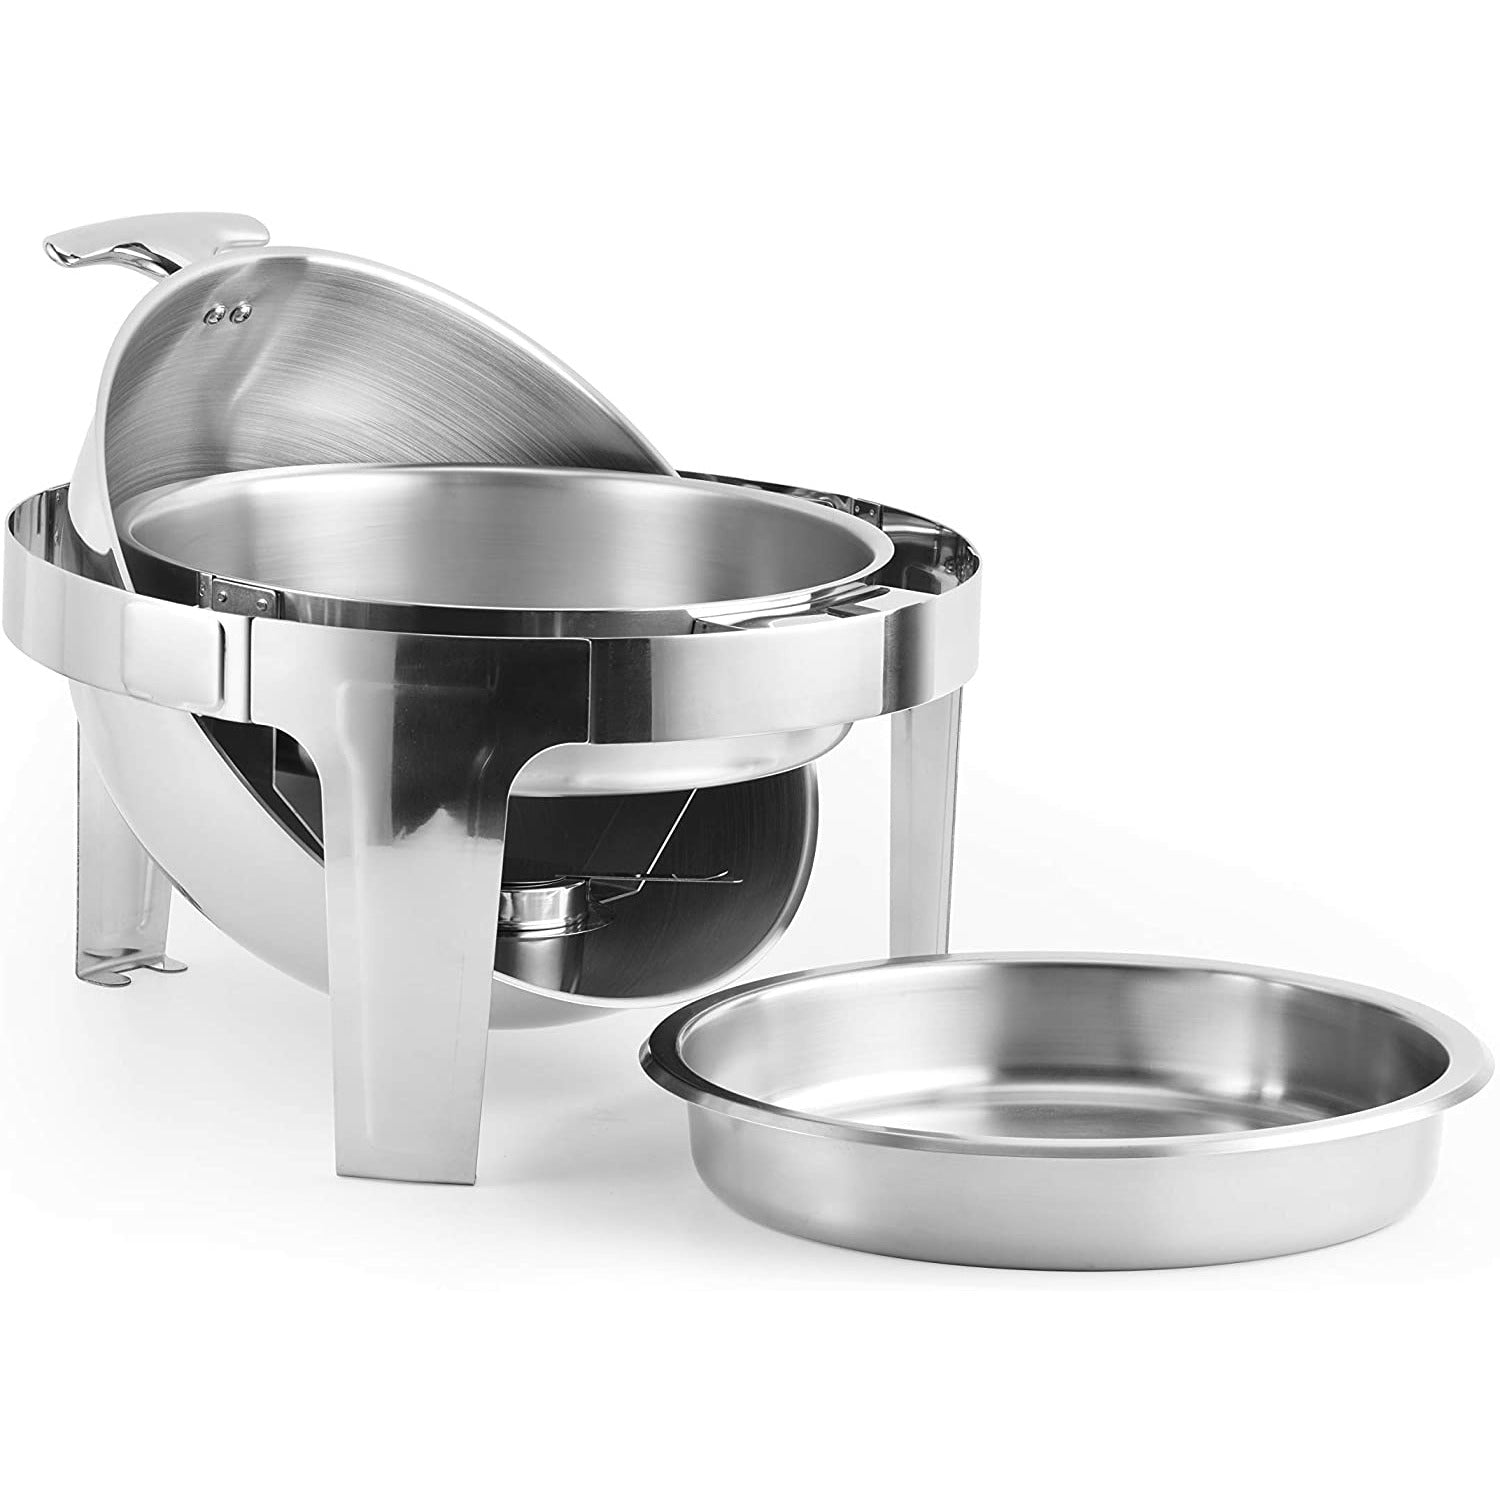 Chafing Dish Round Roll Top Stainless Steel 6 Quart